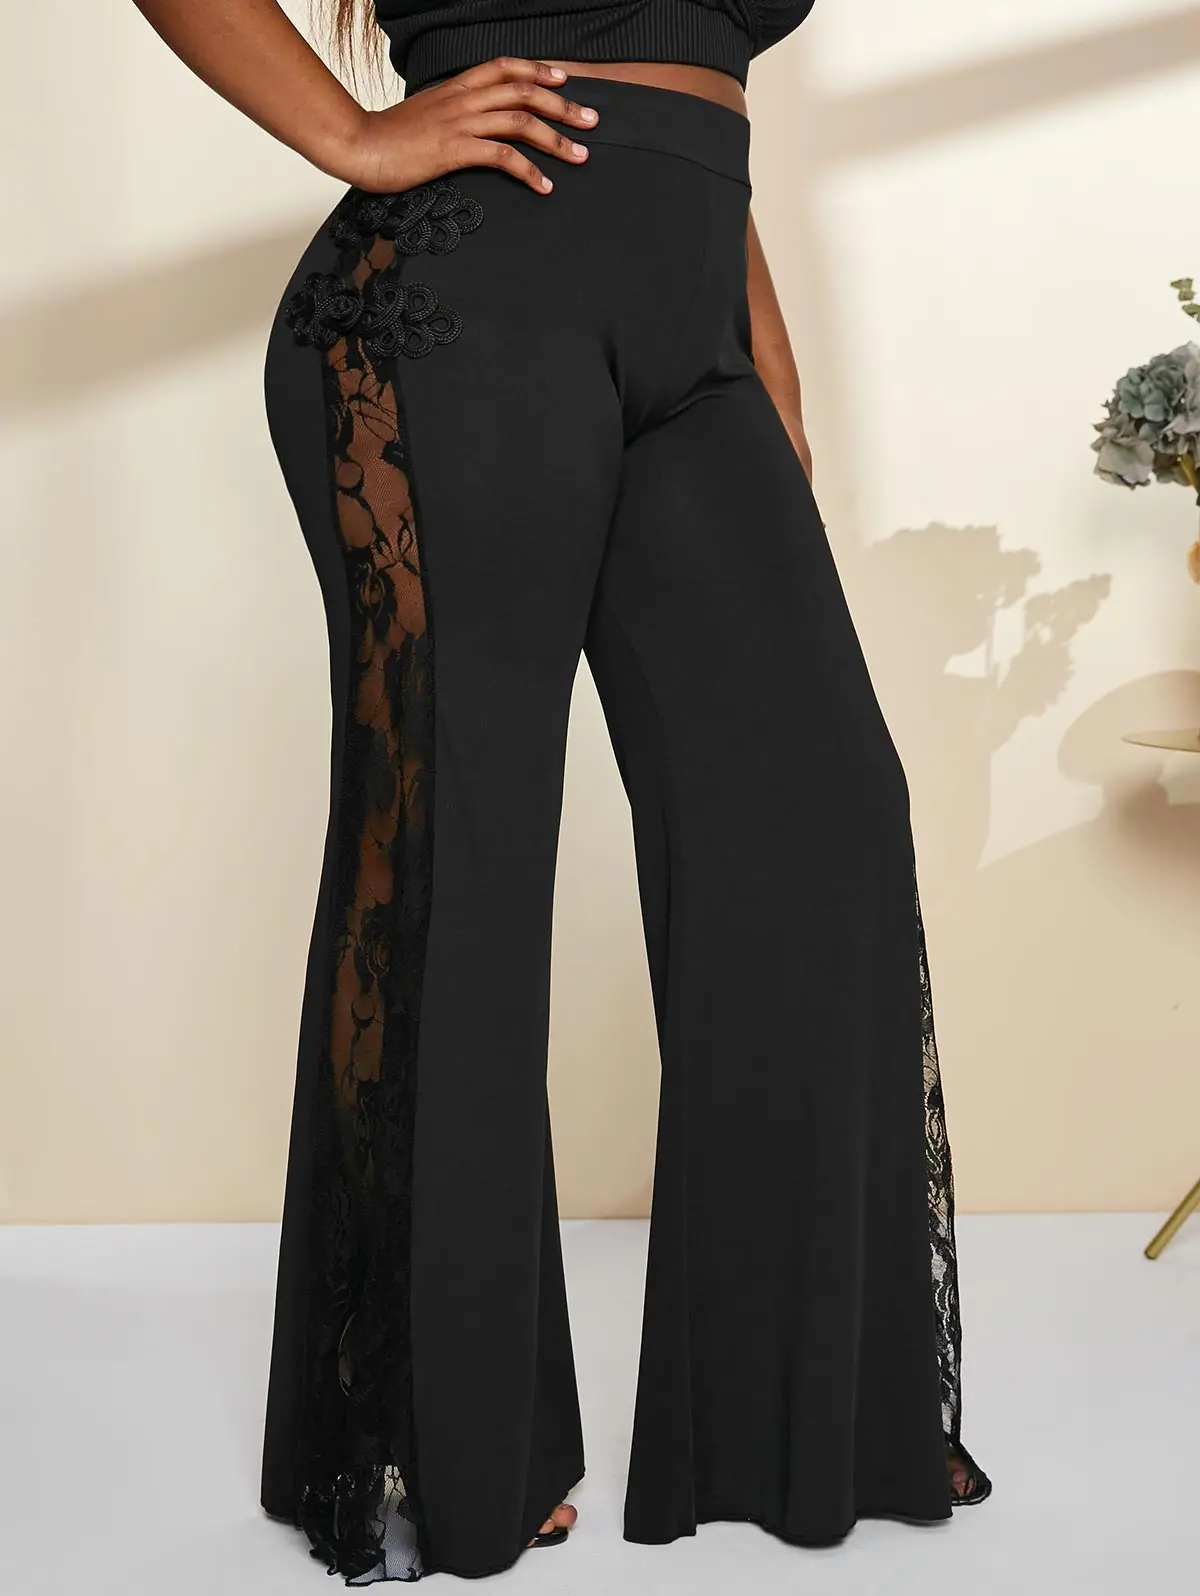 ROSEGAL Side Sheer Lace Panel Bell Bottom Pants Fashion New Ladies High Waist Wide Leg Trousers Drawstring Pull On Pant S-4XL